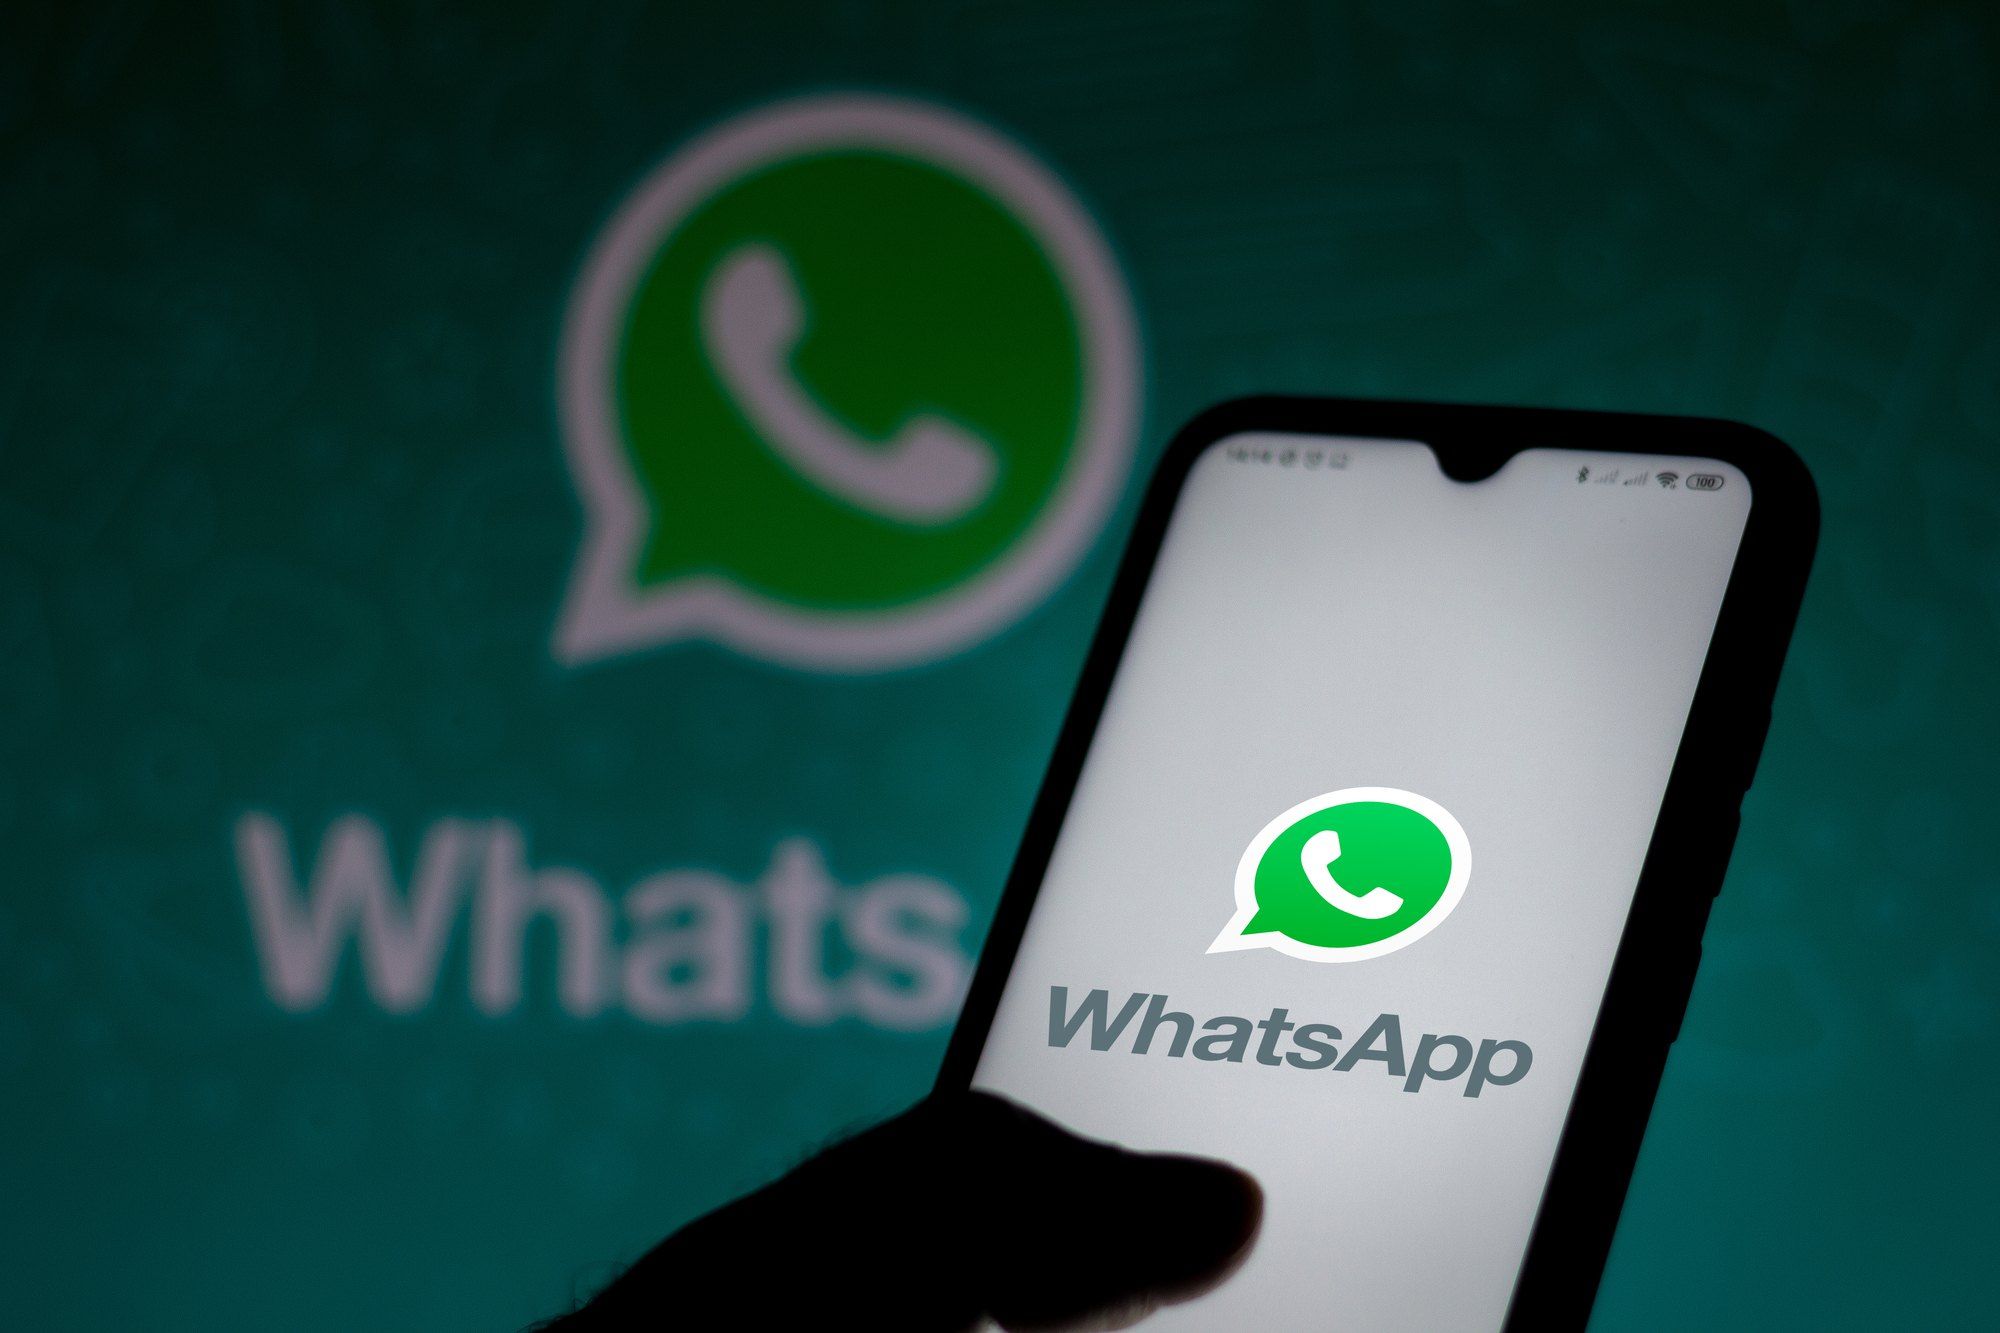 Whatsapp privacy policy has been criticized in a new petition filed in India.